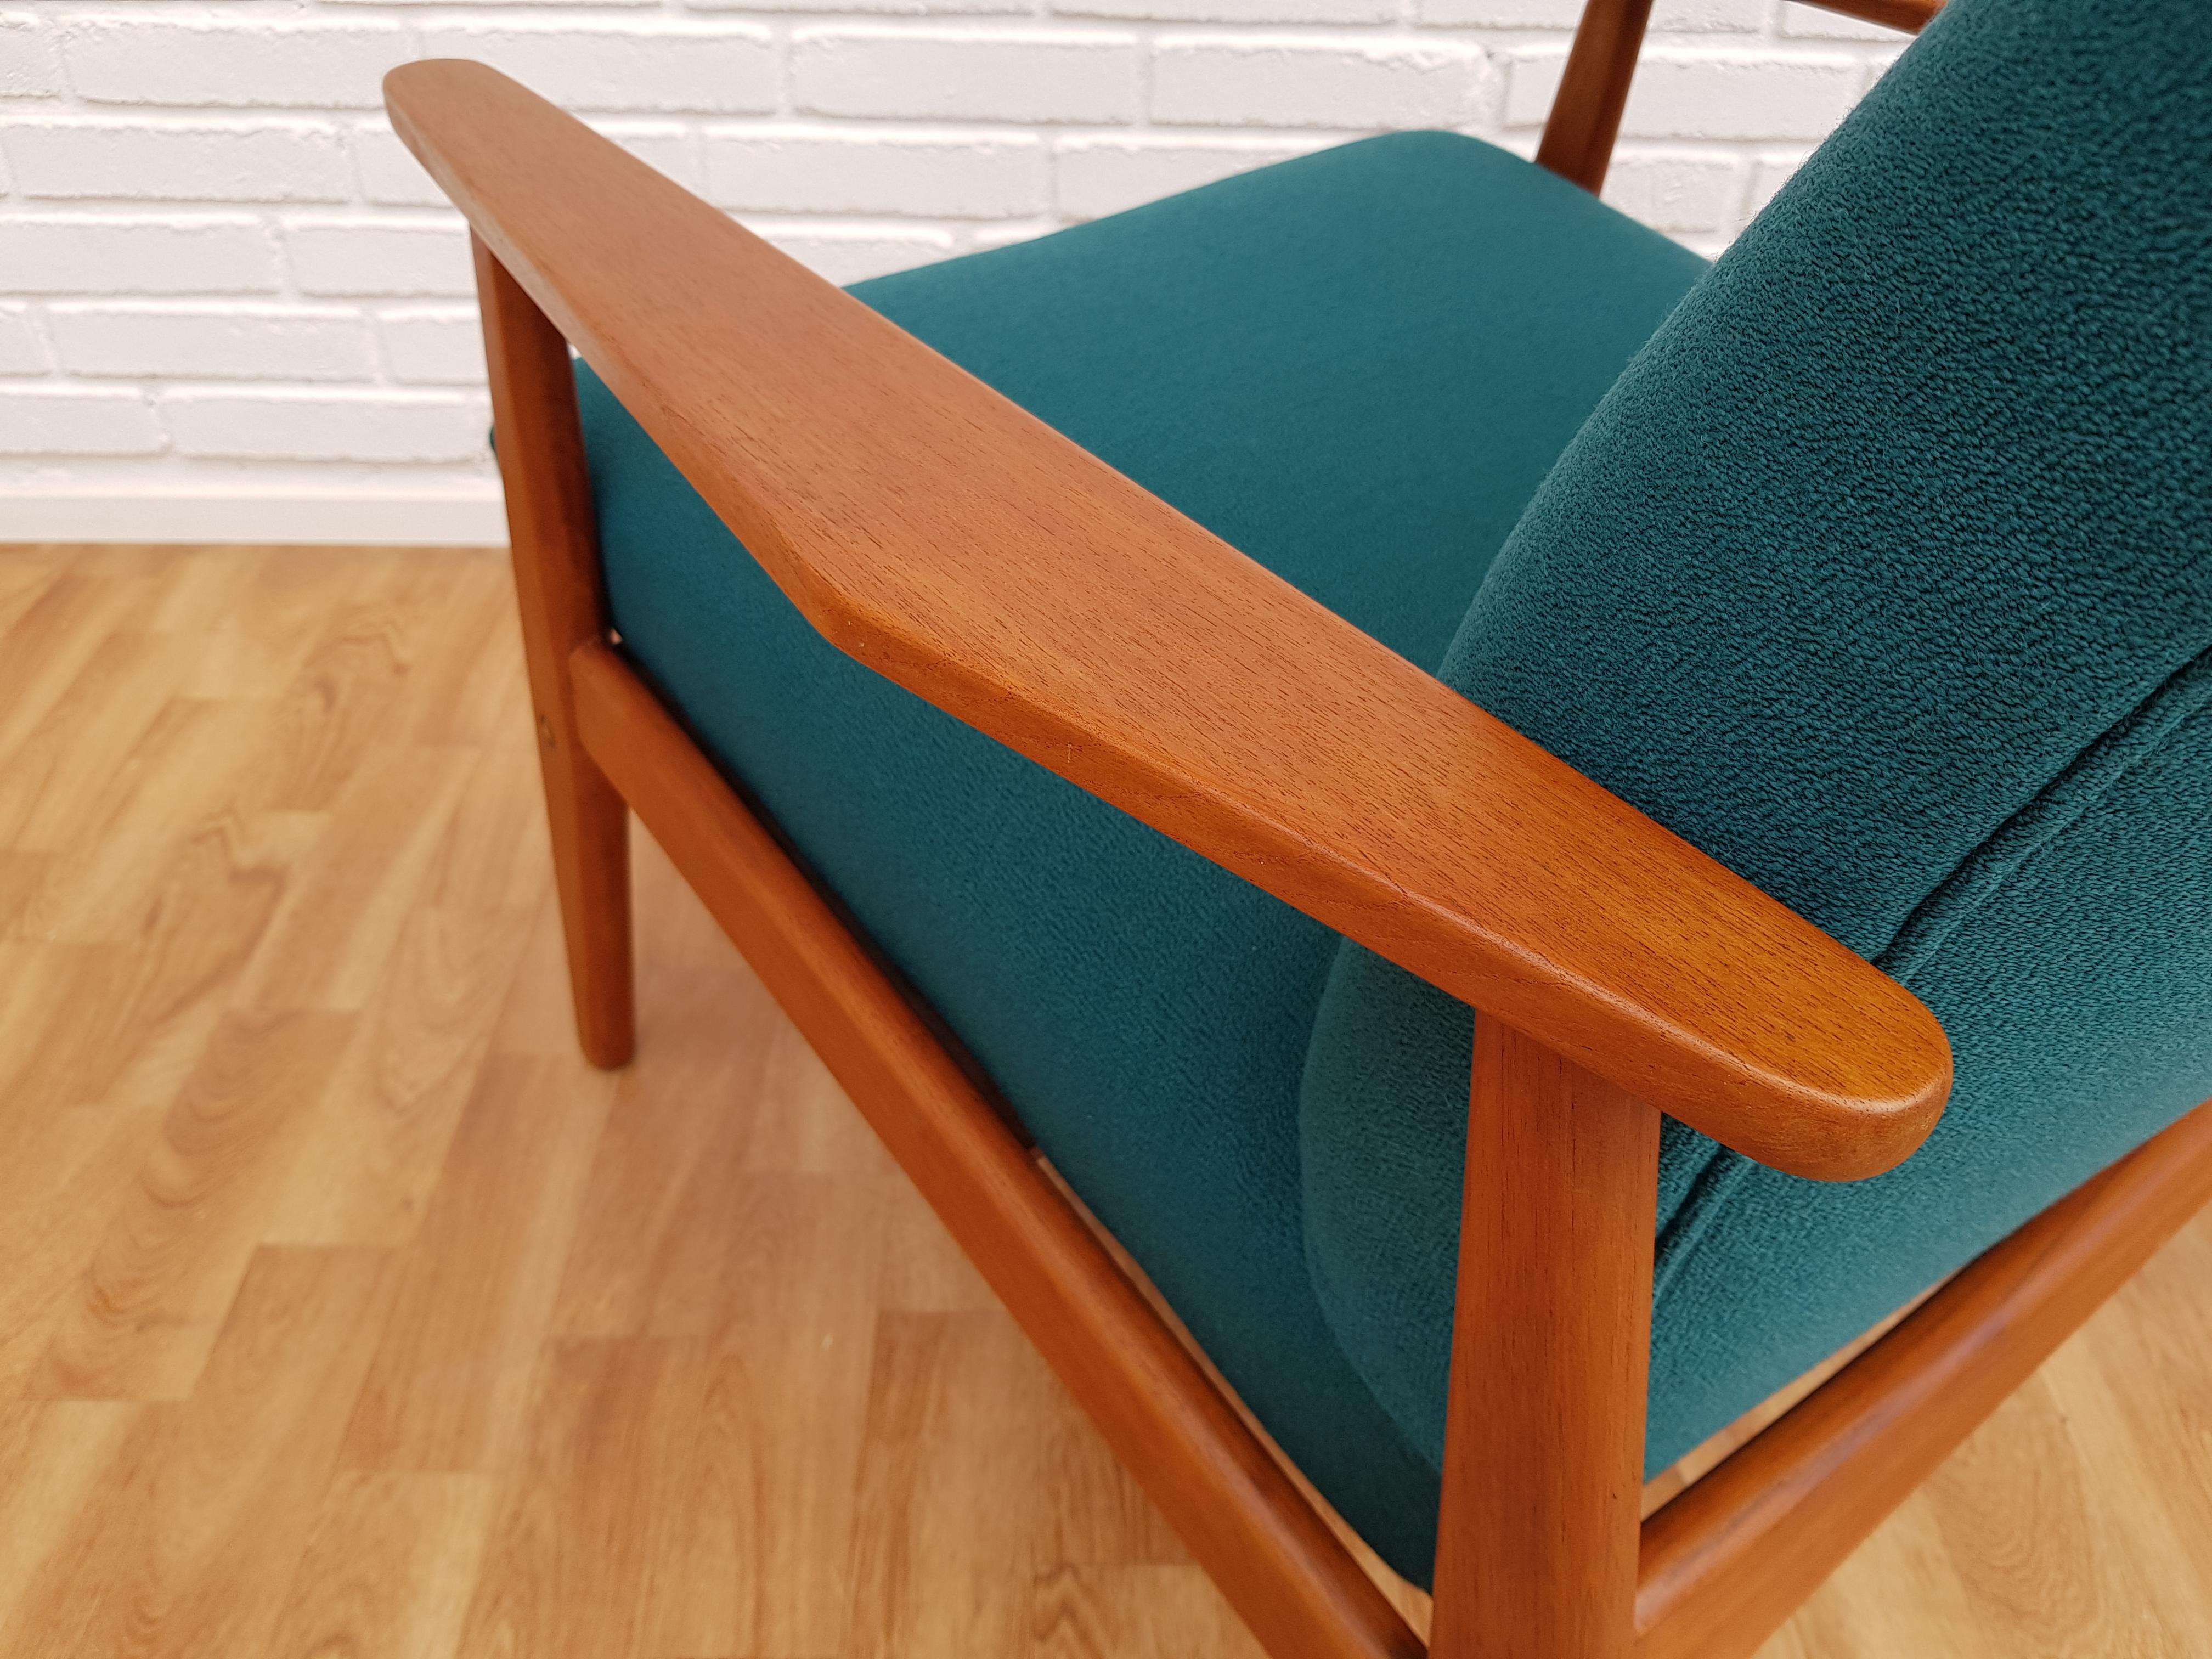 Danish Armchair, Swing Function, Wool, Teak Wood, 1960s, Completely Restored In Good Condition For Sale In Tarm, DK